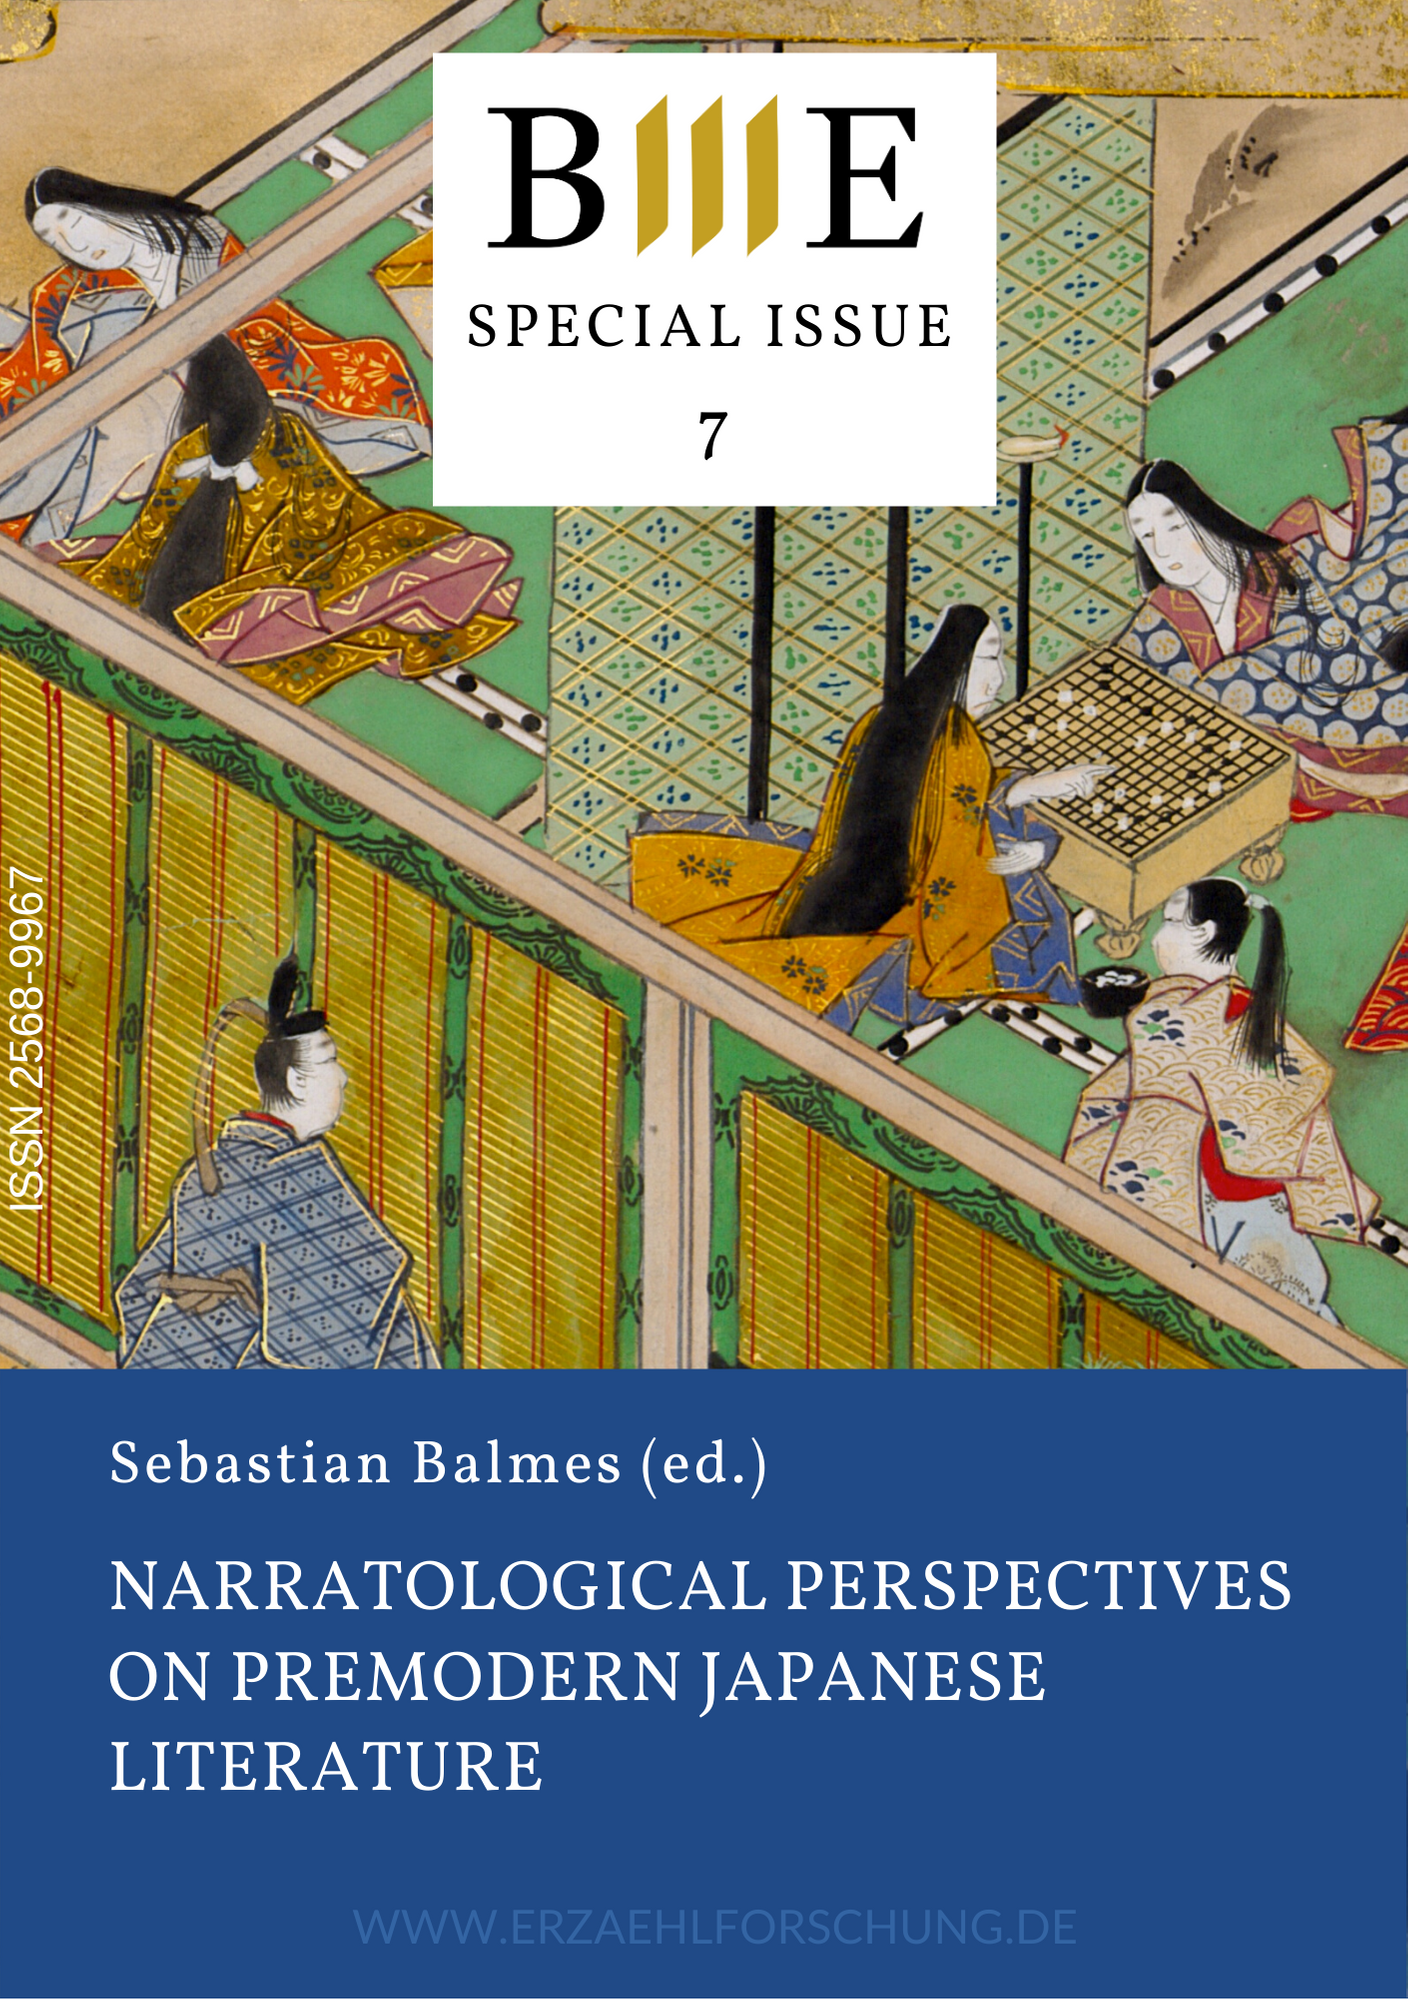 					Ansehen 2020: Special Issue 7: Narratological Perspectives on Premodern Japanese Literature
				